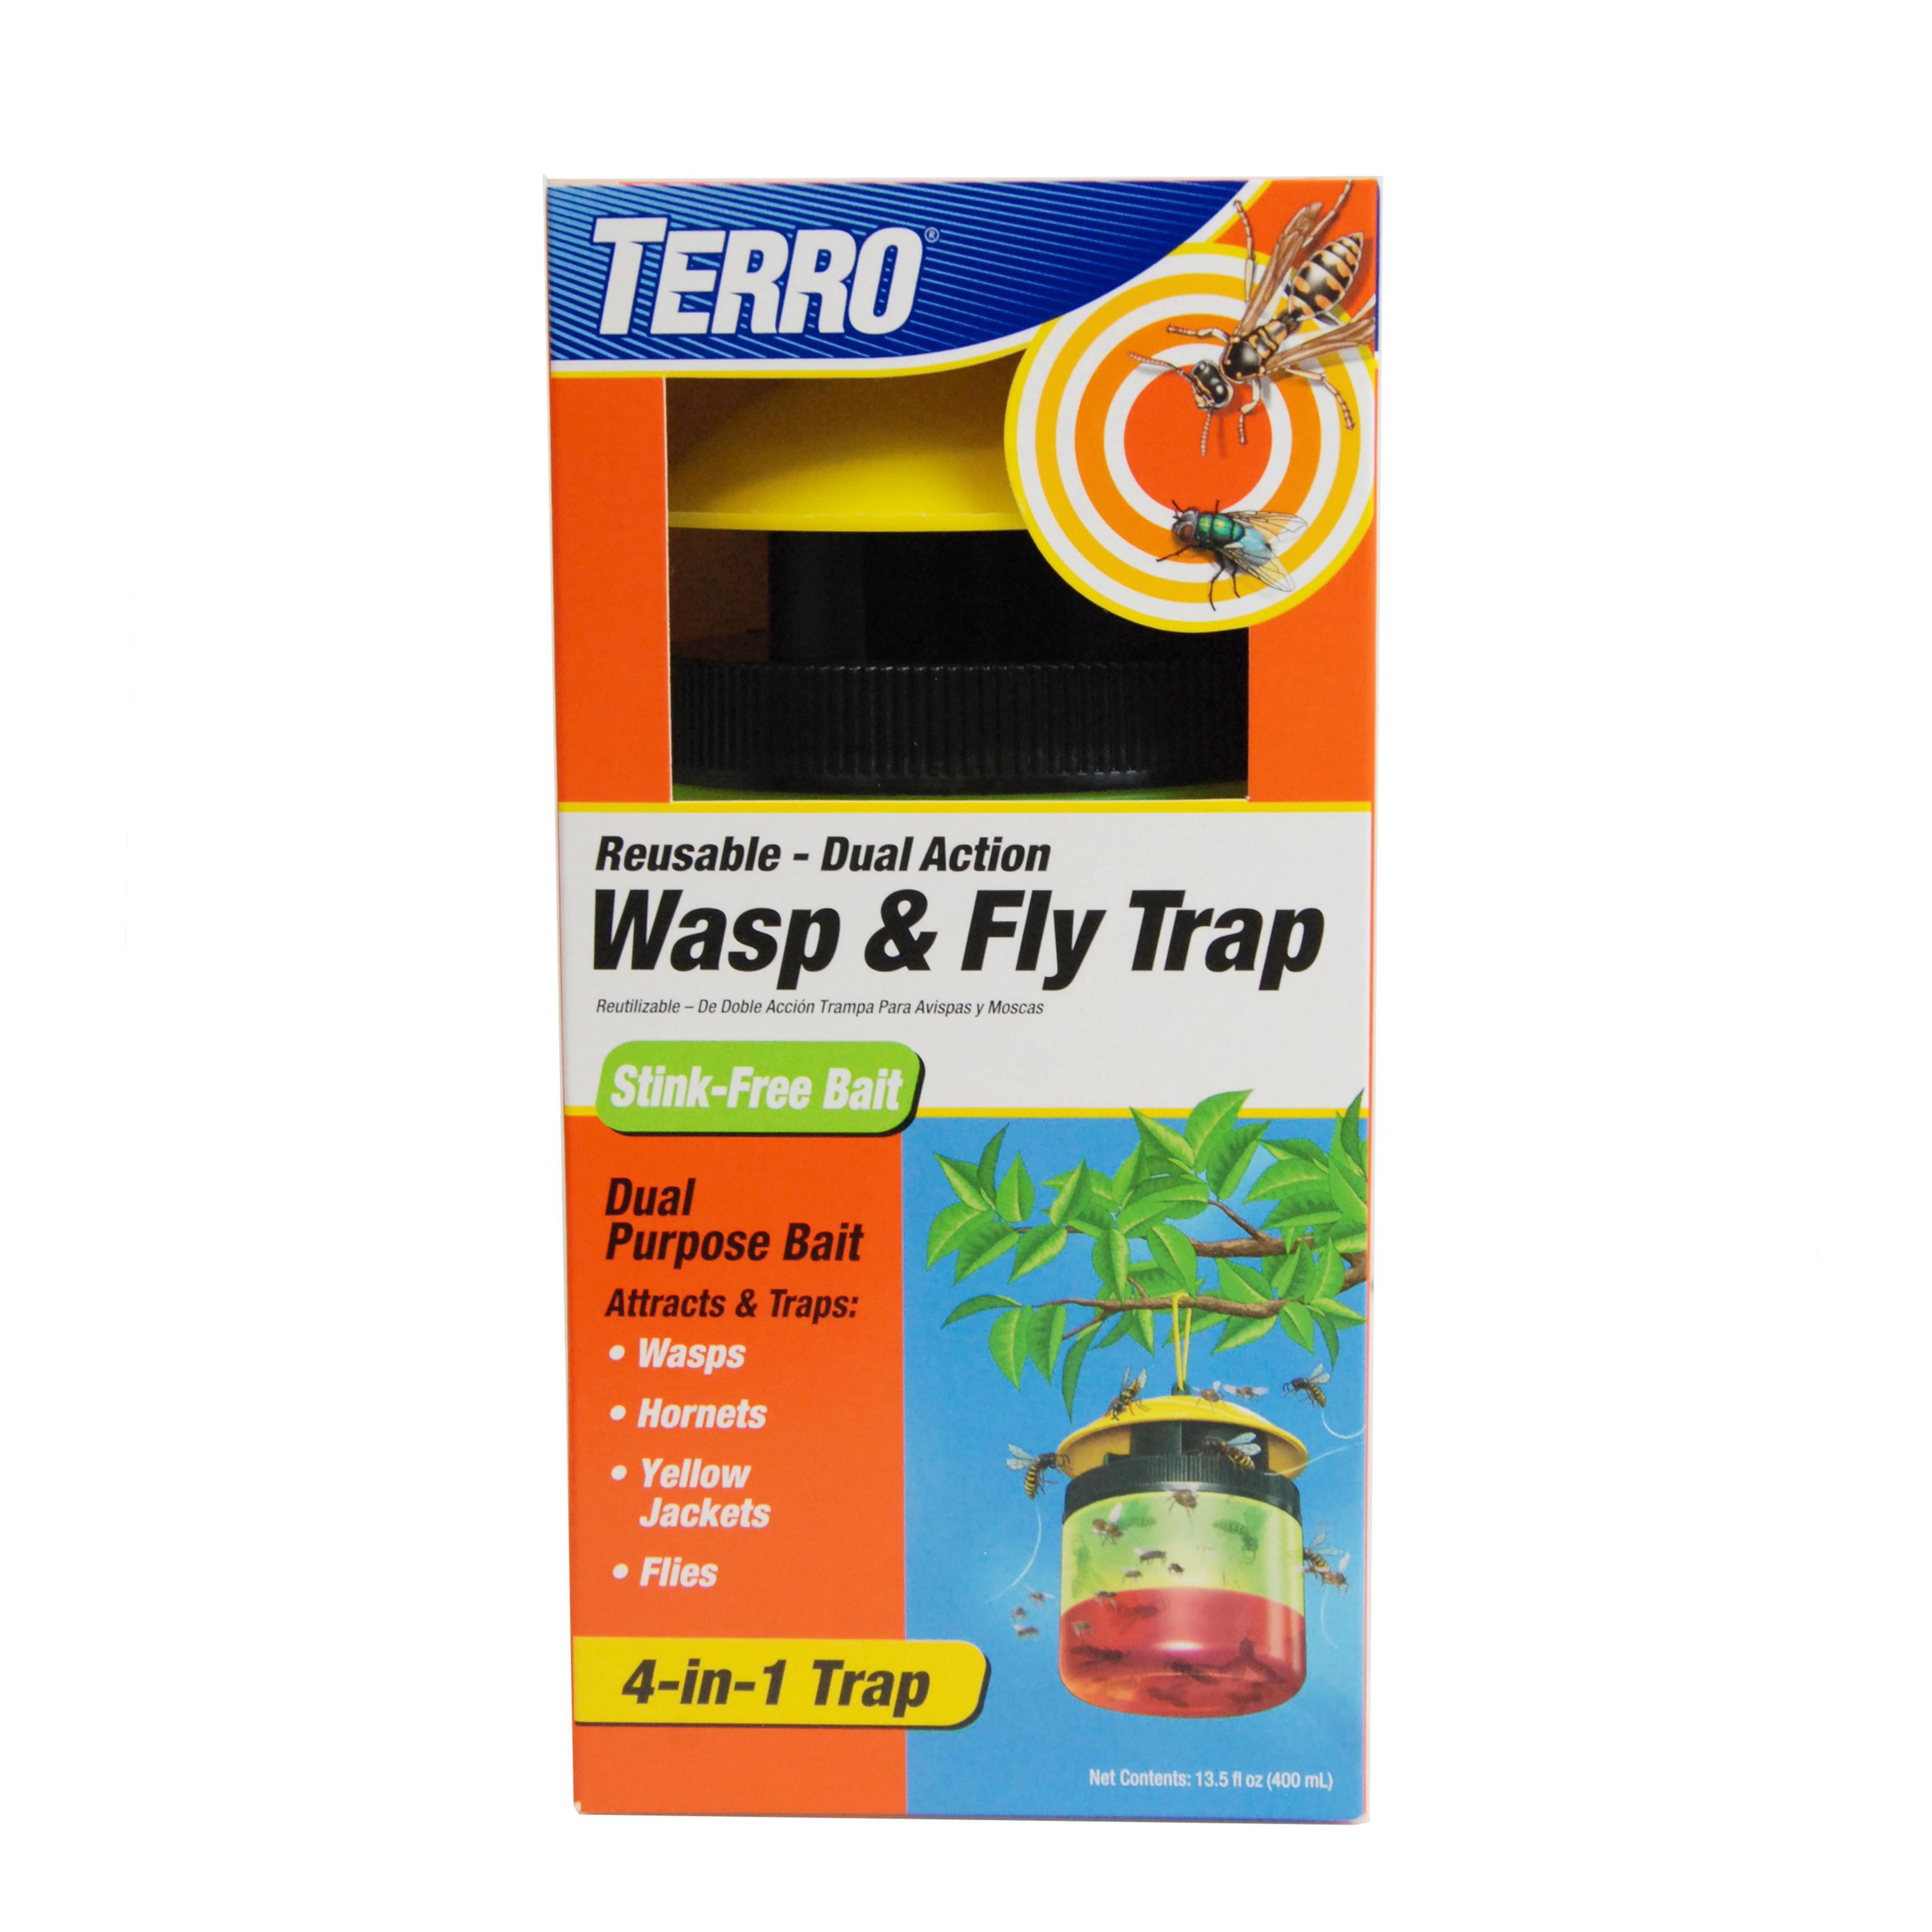 Fieemoo Large Outdoor Bug Trap, Mosquito & Flying Insect Trap Kills Flies,  Moths, Wasps, Gnats, Stink Bugs & Other Flying Insects Protects up to 1/2